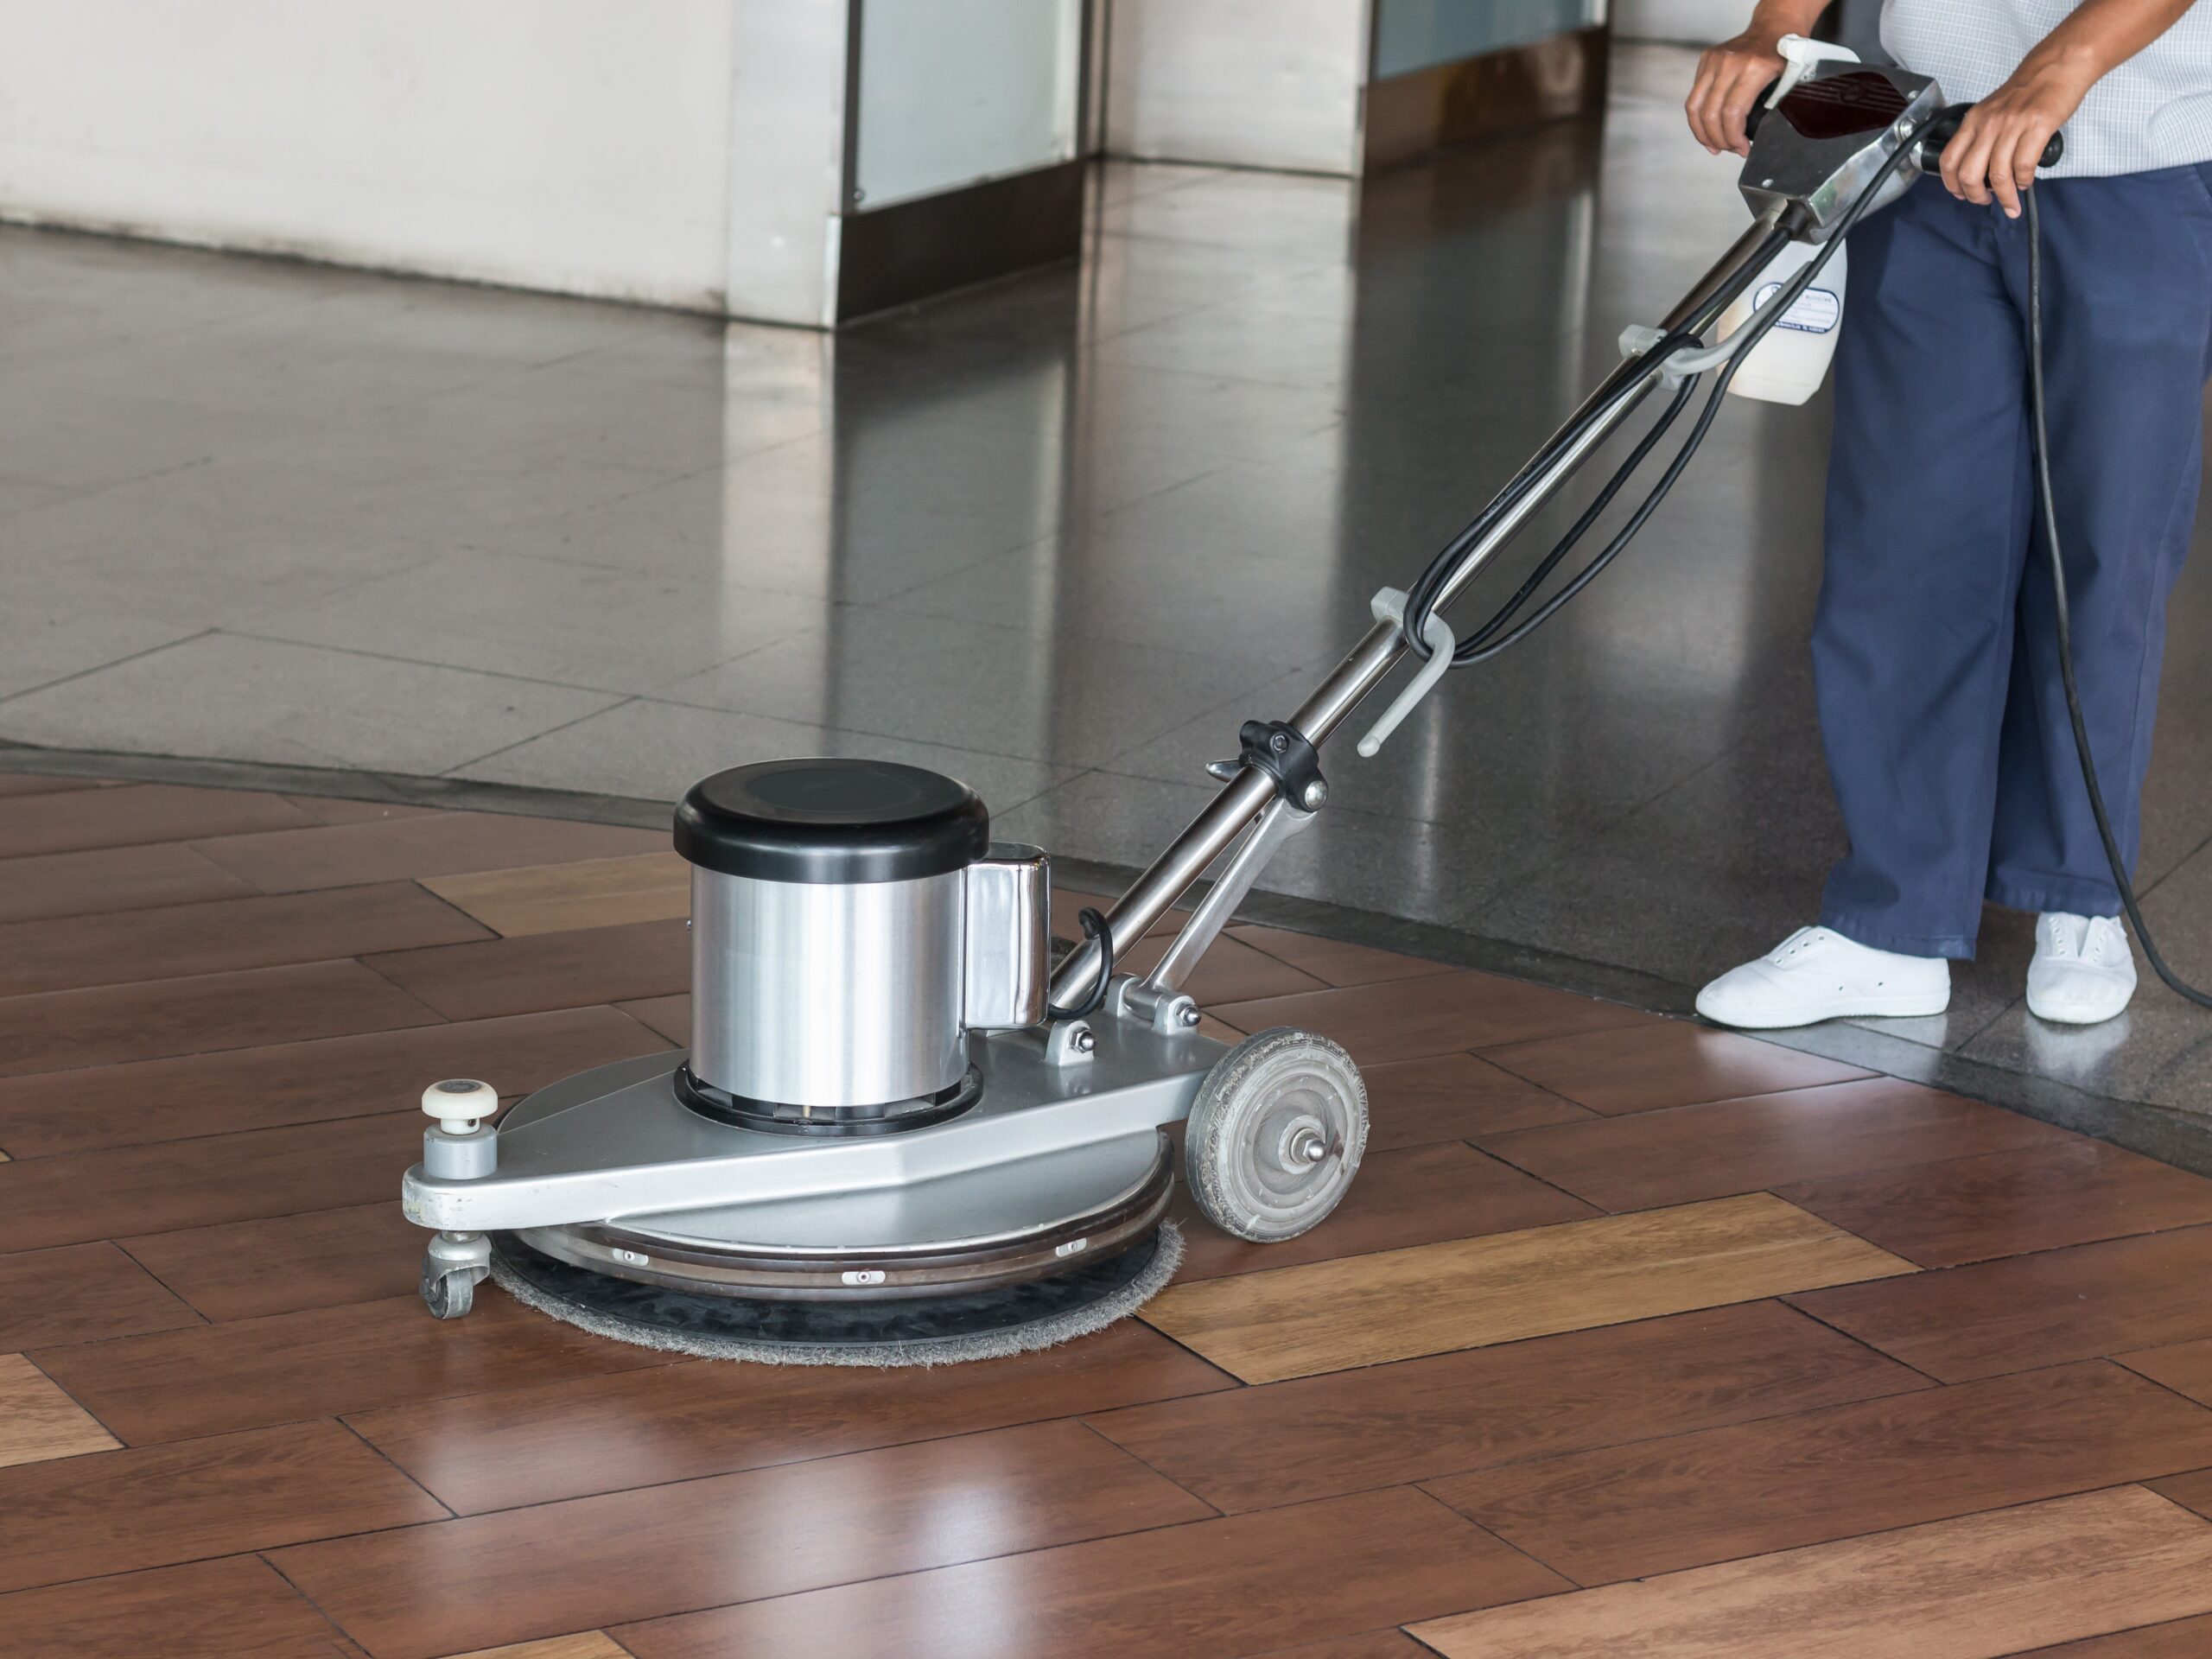 Woman cleaning the floor with polishing machine